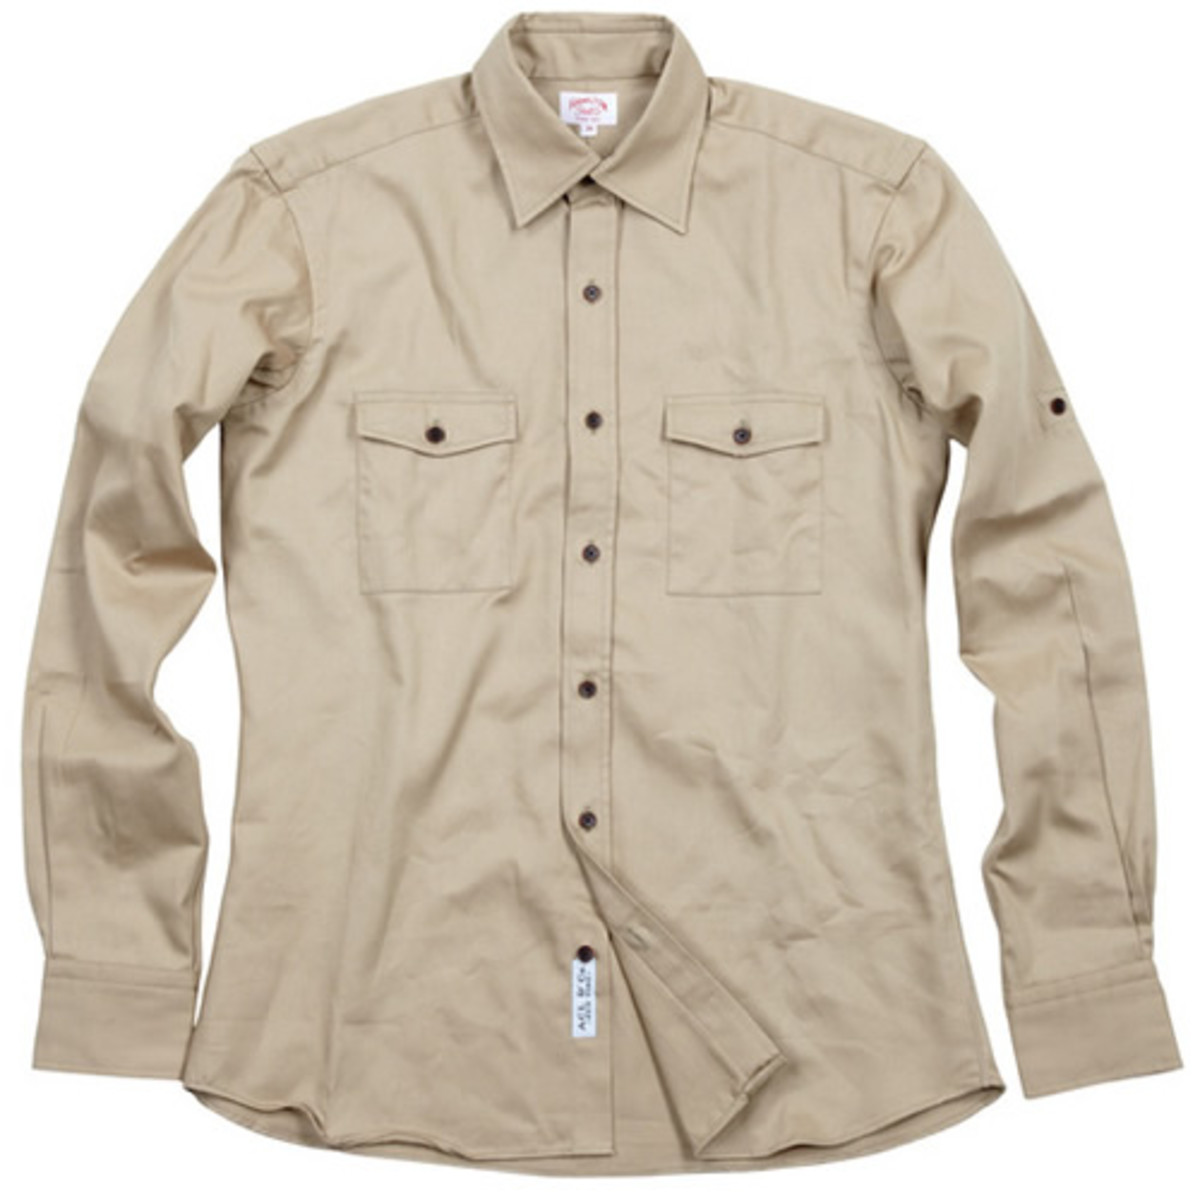 Twill Utility Shirt by Hamilton 1883 x ACL & Co. - Acquire